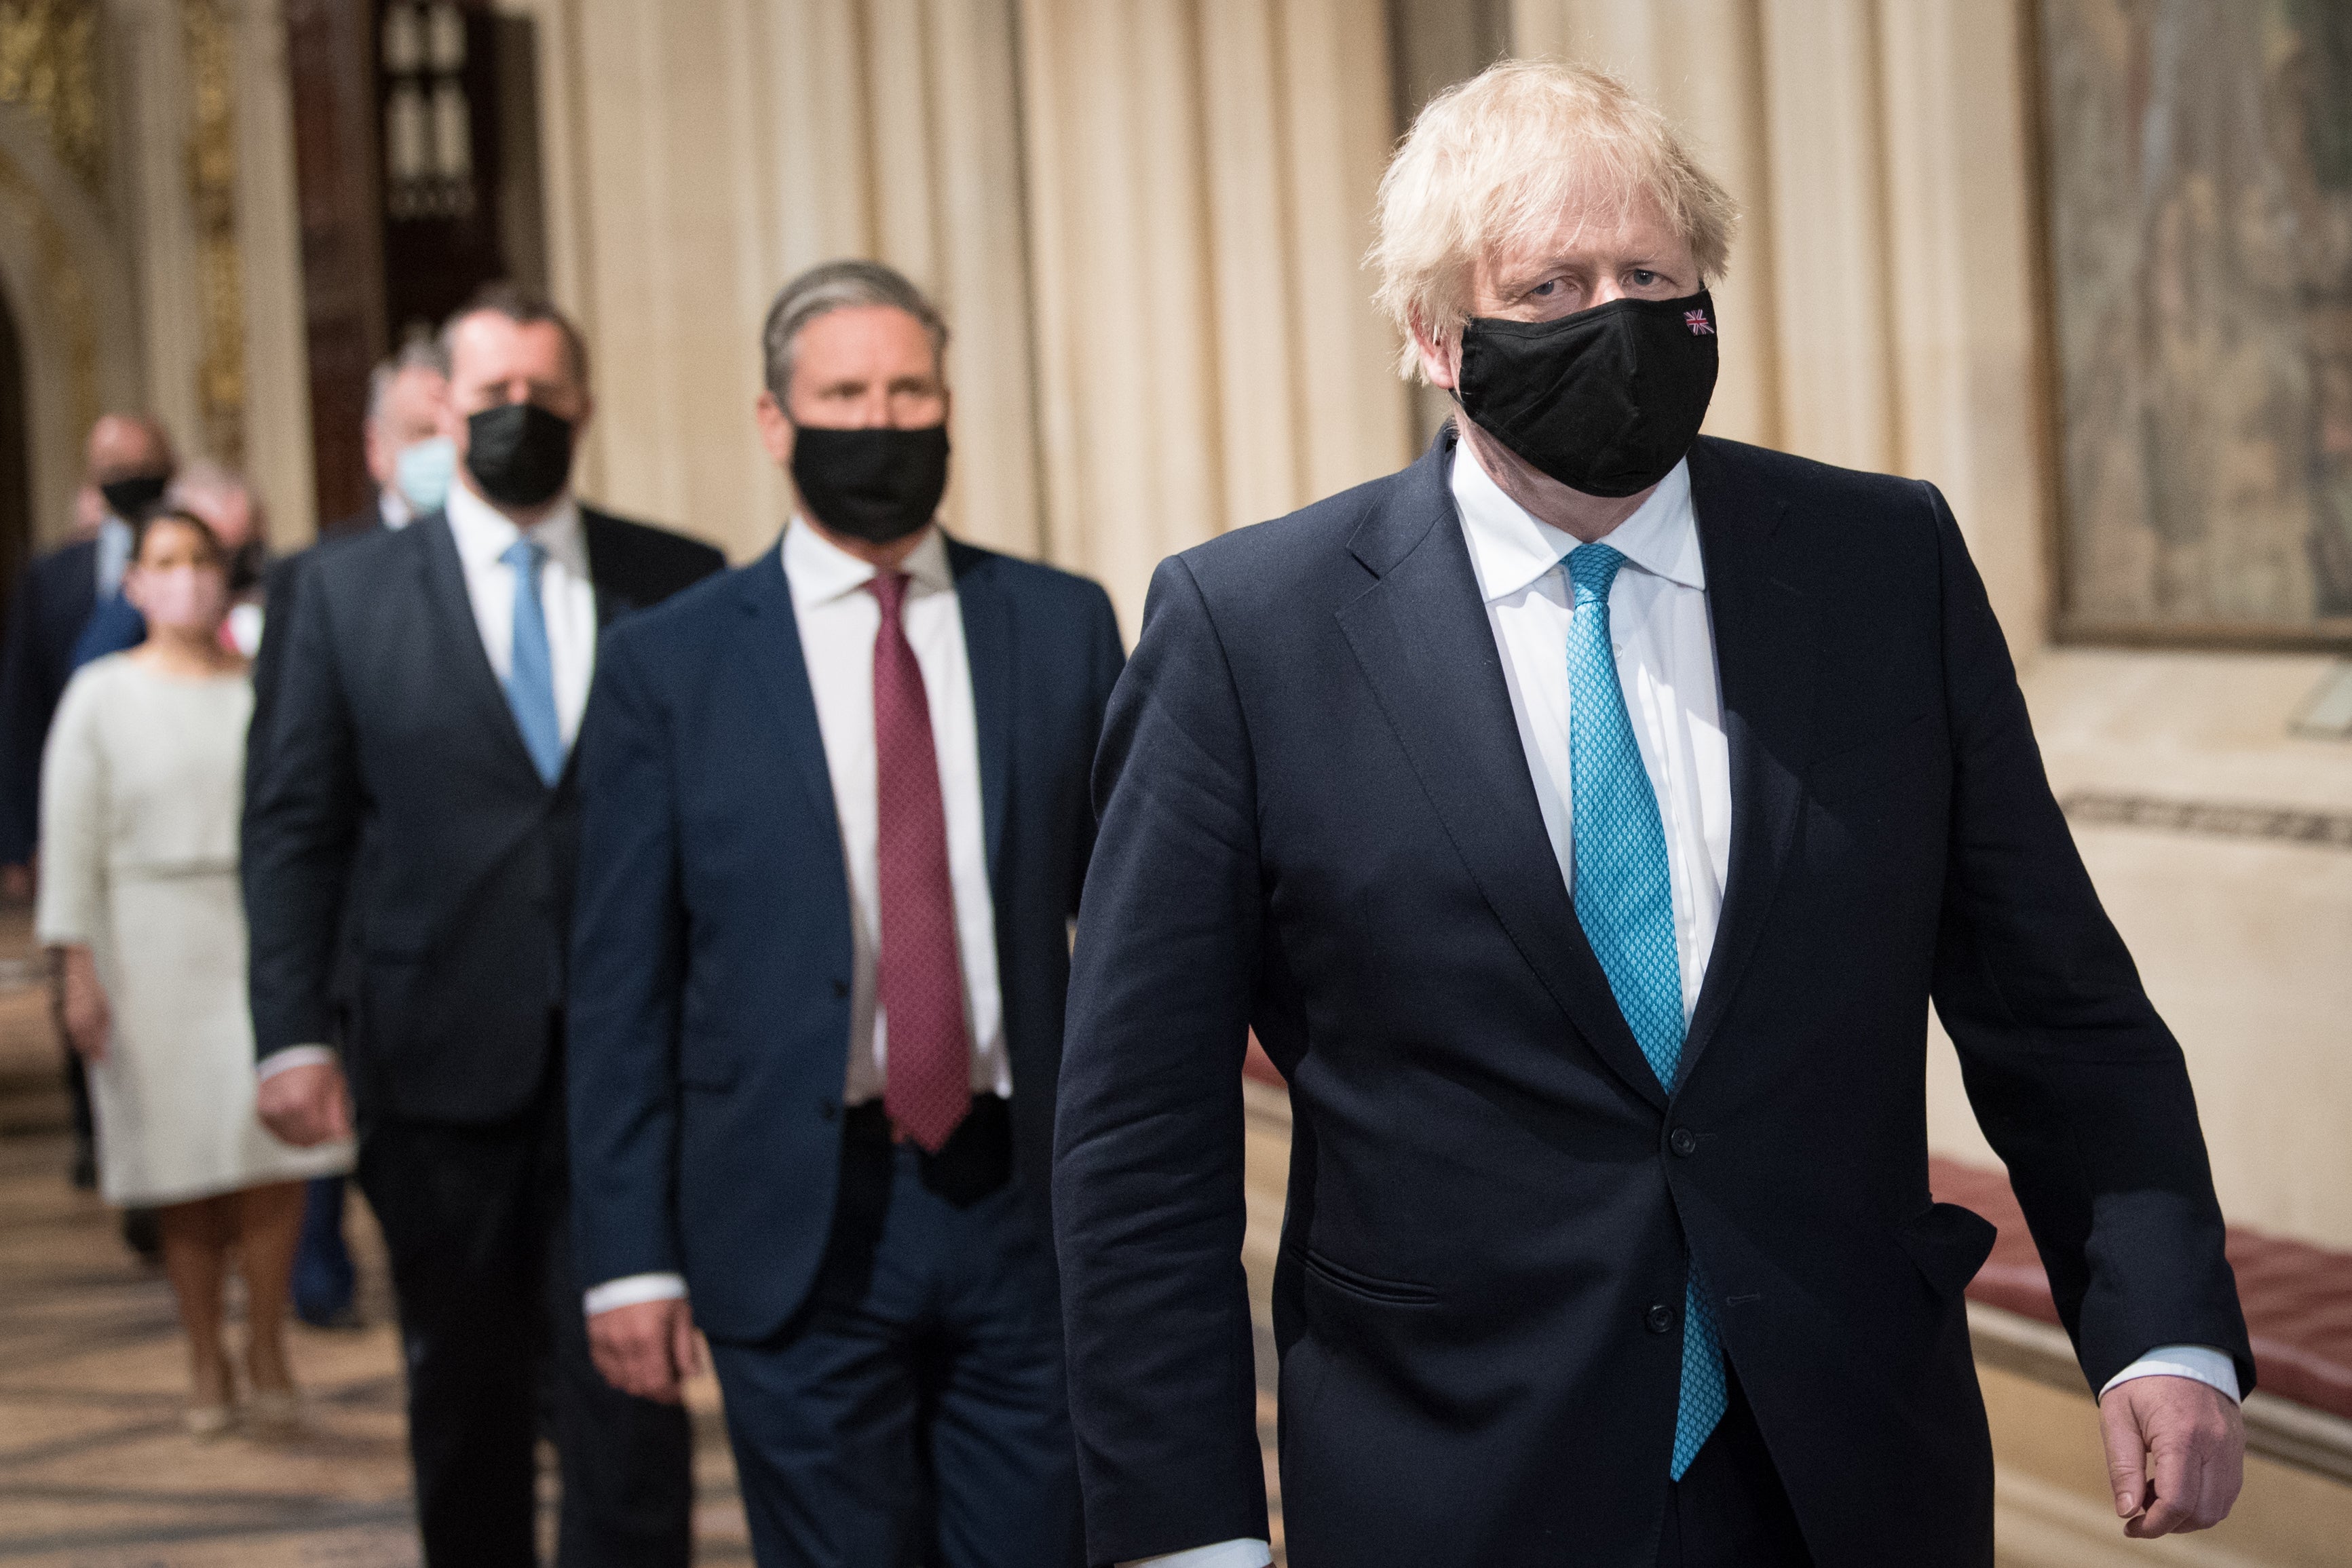 Prime Minister Boris Johnson with Labour leader Sir Keir Starmer behind him walk through the Central Lobby on their way from the House of Lords after listening to the Queen’s Speech (Stefan Rousseau/PA)